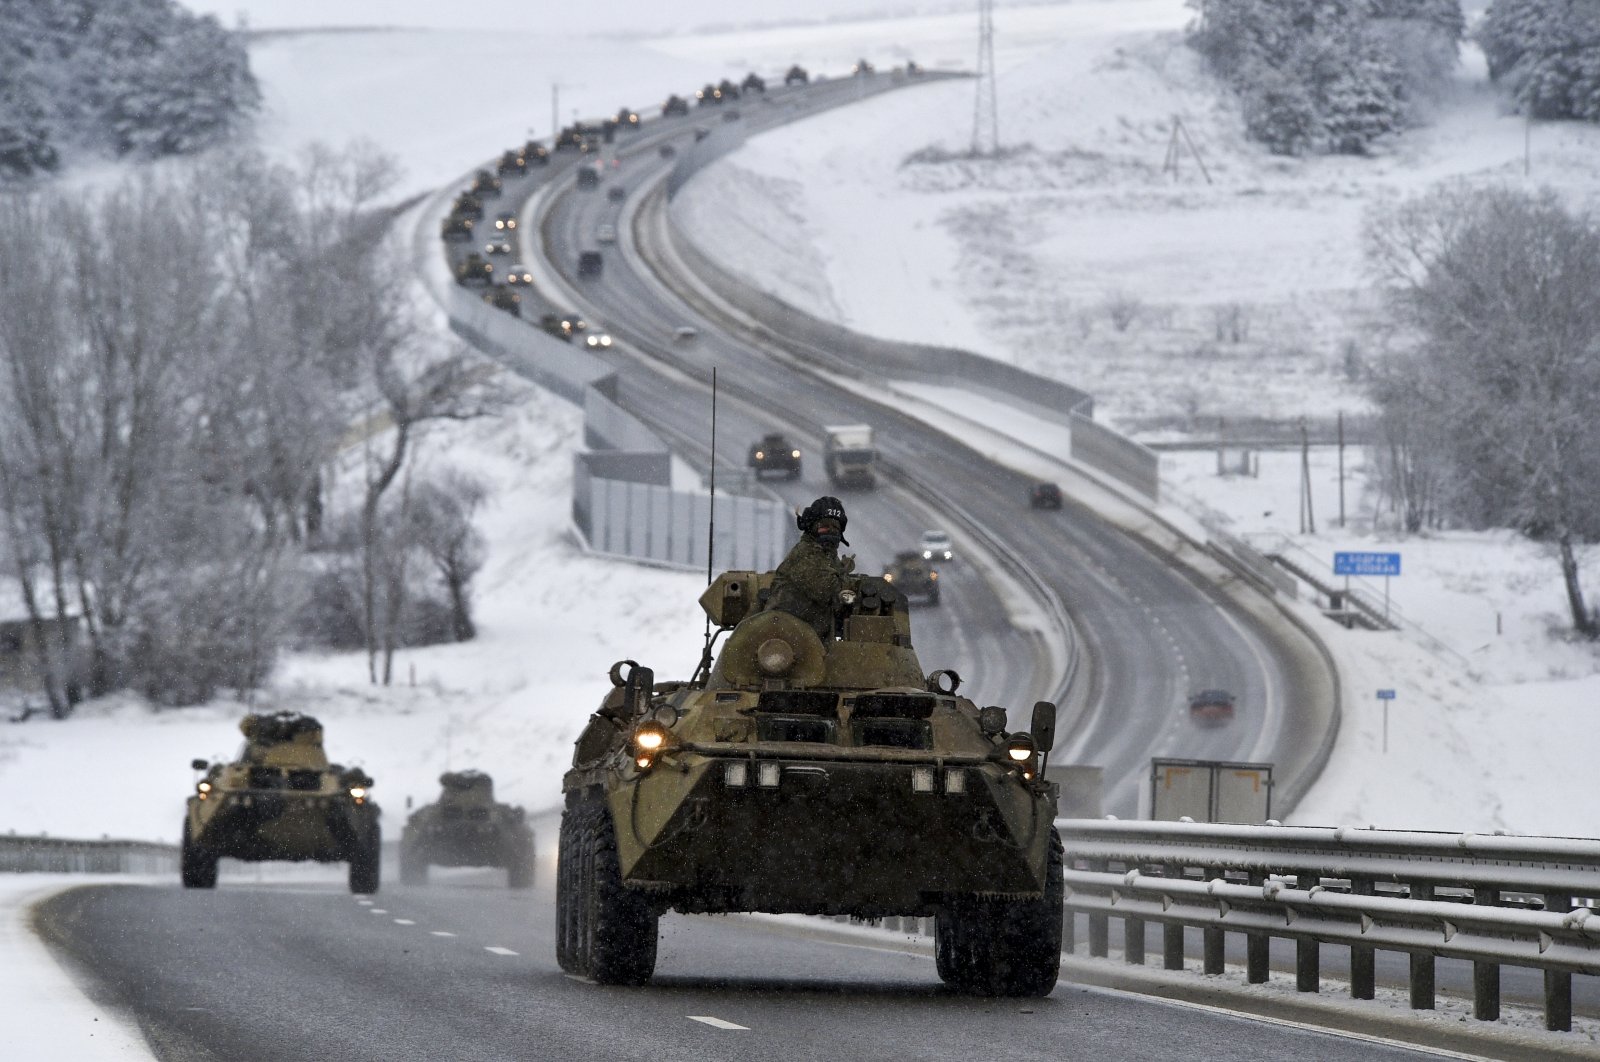  A convoy of Russian armored vehicles moves along a highway in Crimea, Tuesday, Jan. 18, 2022. A buildup of an estimated 100,000 Russian troops near Ukraine has fueled Western fears of an invasion, but Moscow has denied having plans to launch an attack while demanding security guarantees from the the U.S. and its allies. (AP Photo/File)